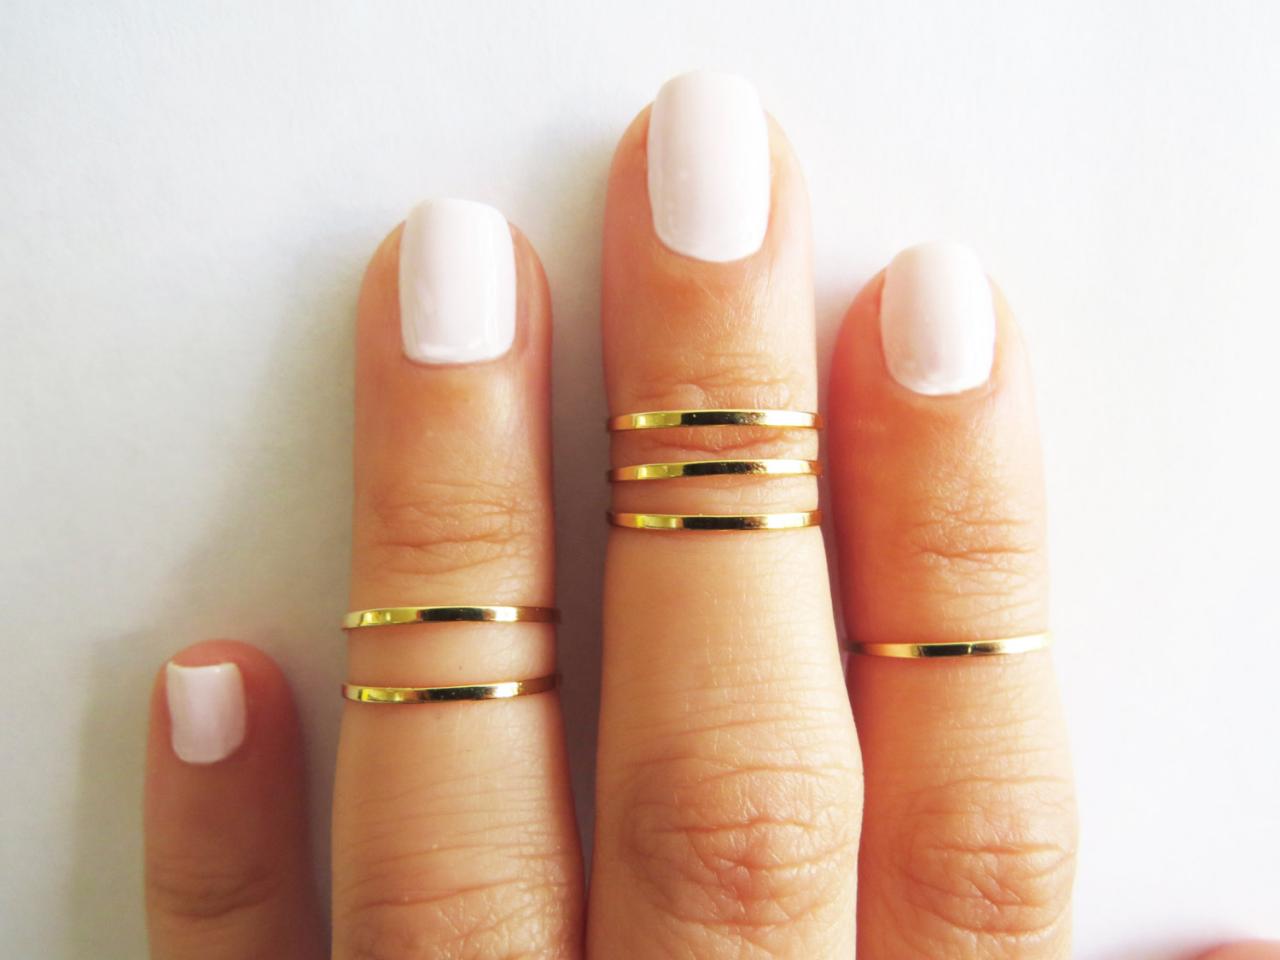 Thin Gold Ring - Stacking Rings, Knuckle Ring, Gold Shiny Bands, Set Of 6 Stack Midi Rings, Gold Jewelry, Wire Ring, Gold Accessories